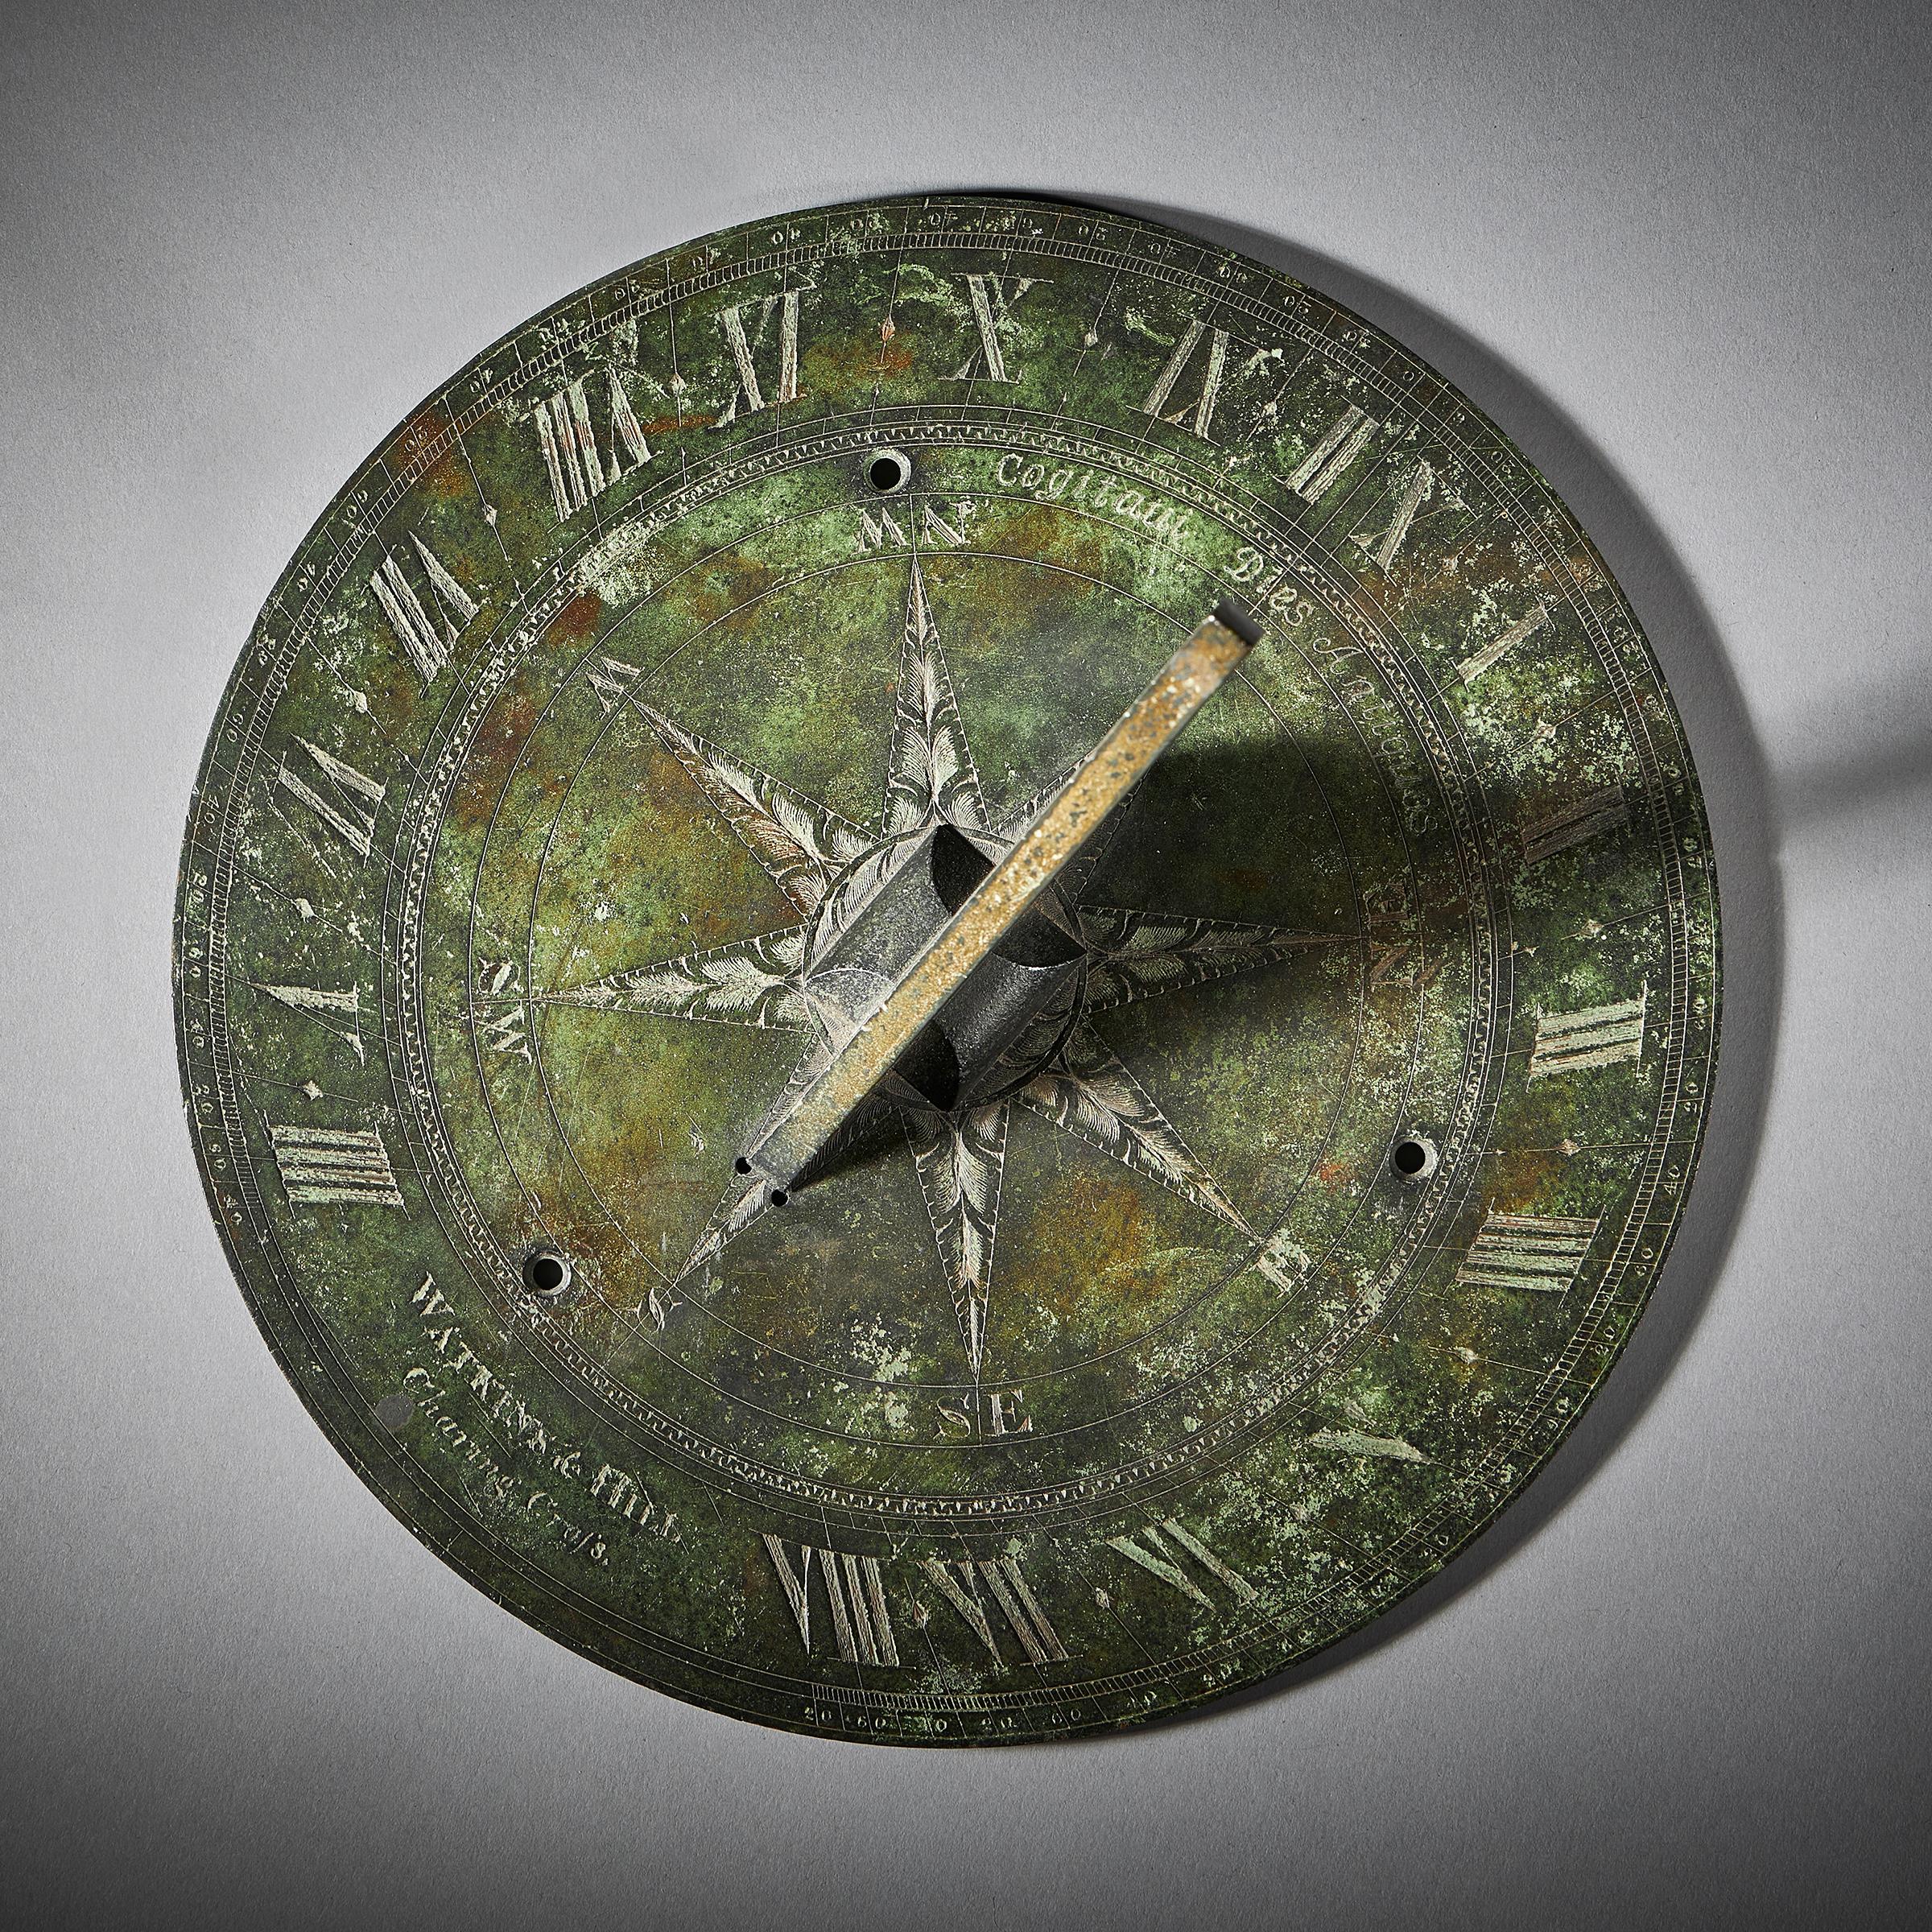 A beautifully weathered circular bronze sundial by Watkins & Hill, first half of the 19th century. The sundial was designed and calibrated to be used outside on a stone base in a garden in Southern England. 

The engraved base plate, which has a